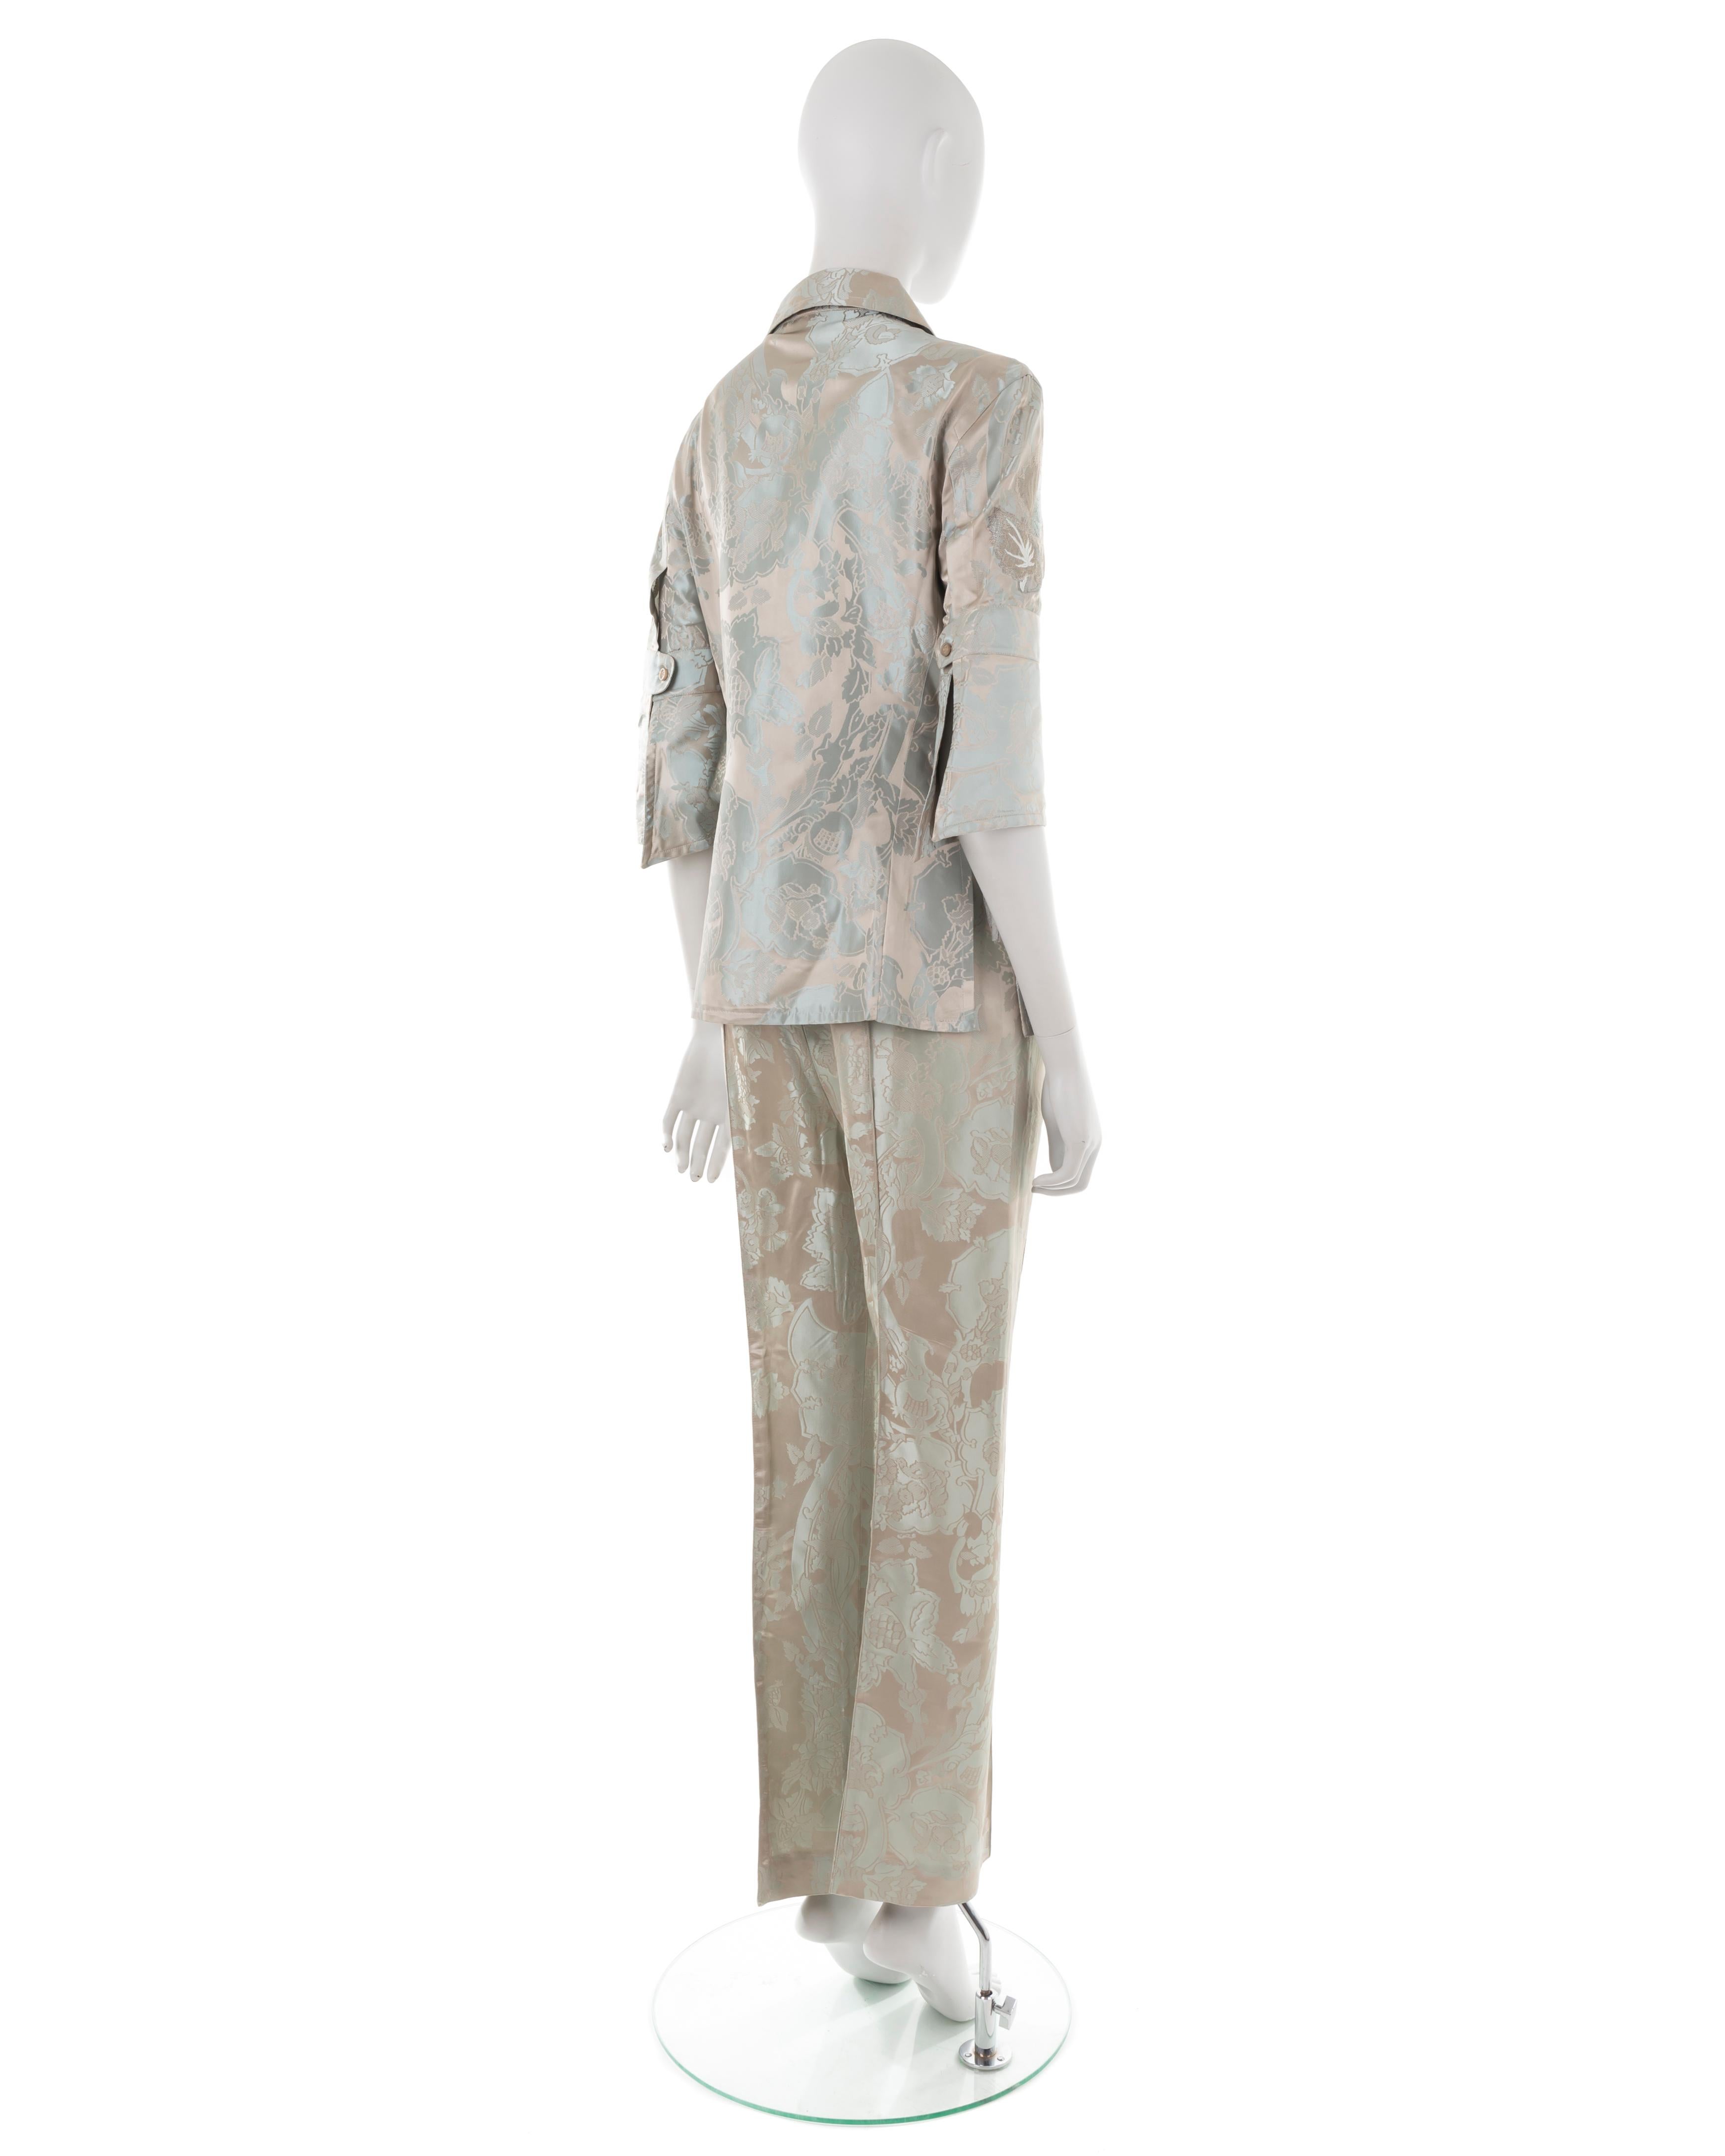 Women's Gianfranco Ferrè S/S 2000 silver jacquard embroidered suit For Sale